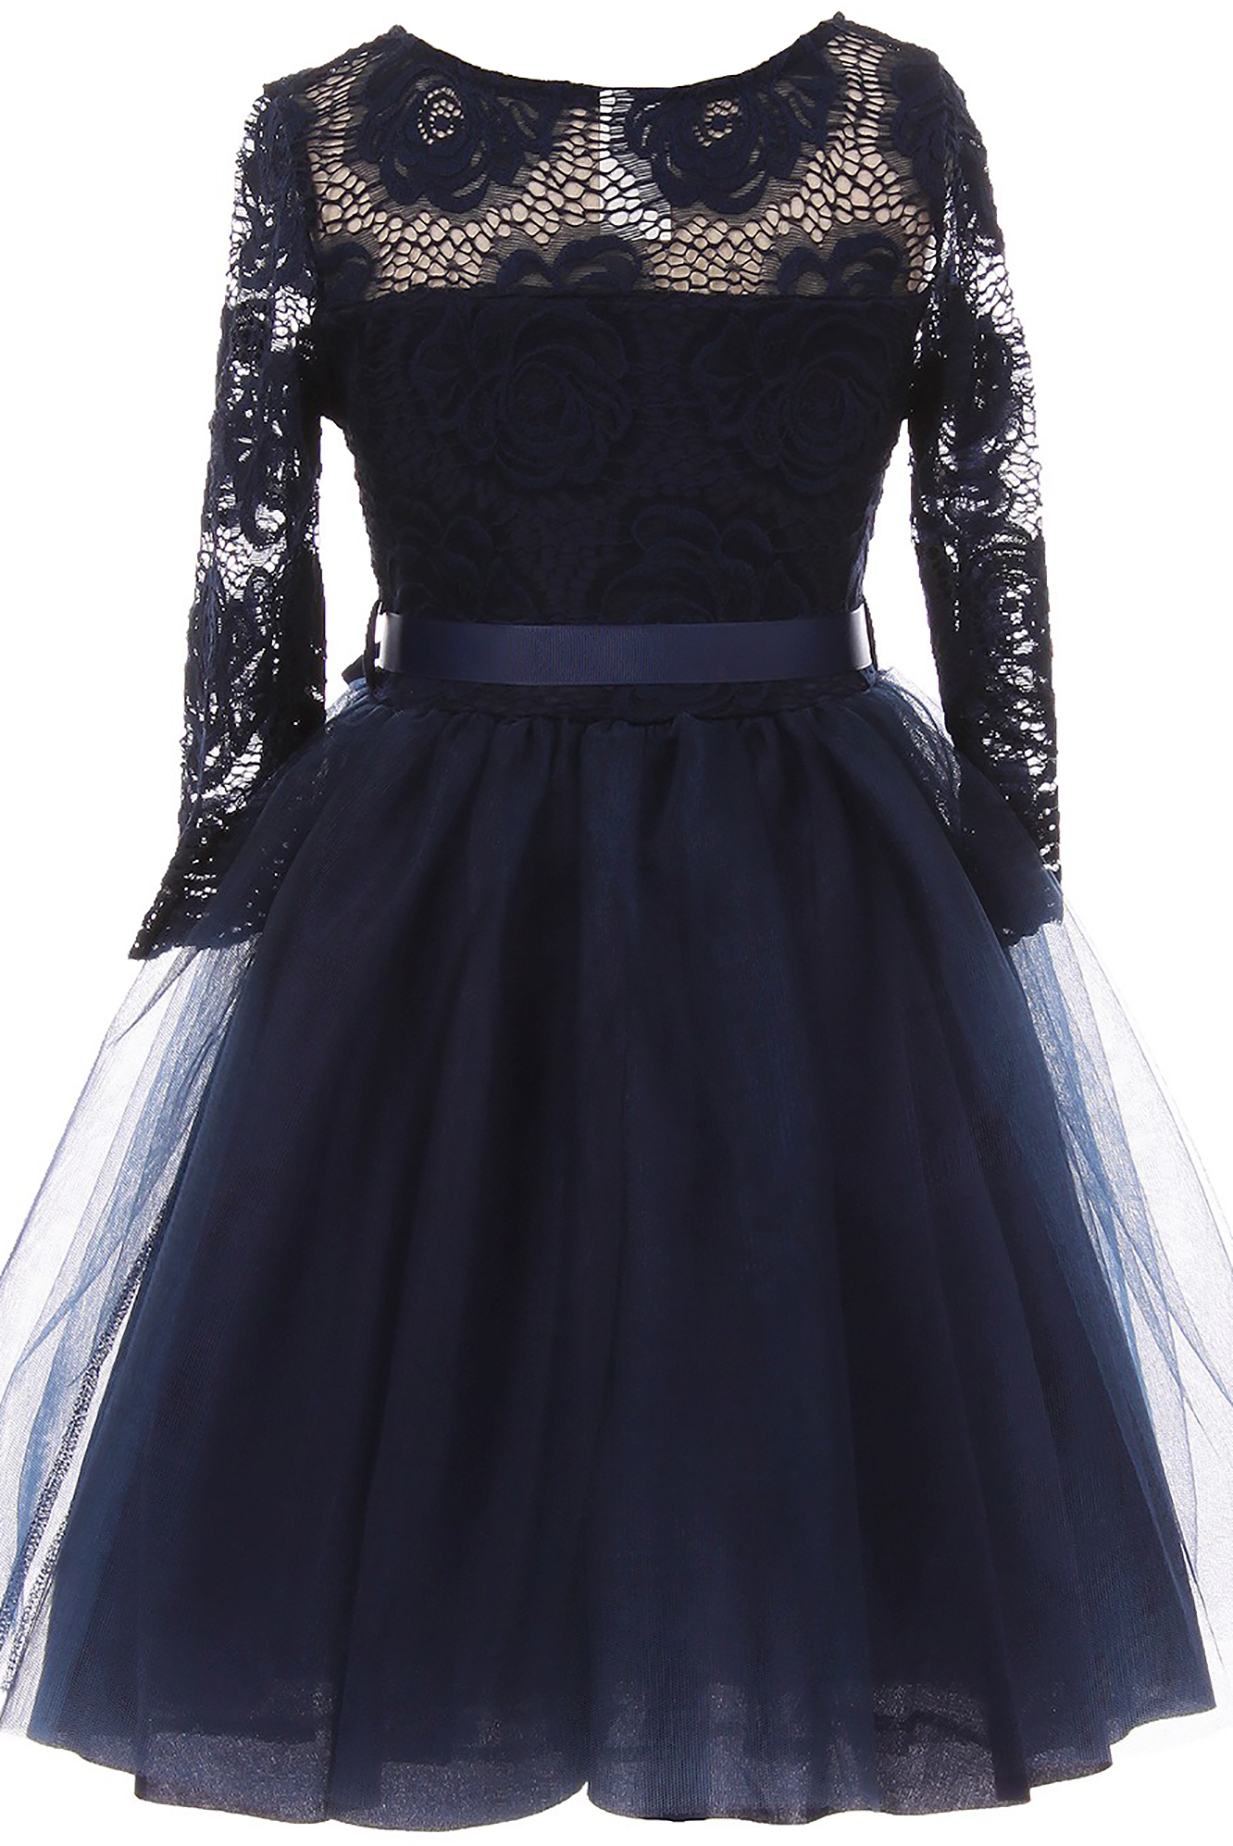 Little Girl Floral Lace Top Tulle Flower Party Flower Girl Dress USA Navy 4 JKS 2098 - image 2 of 3